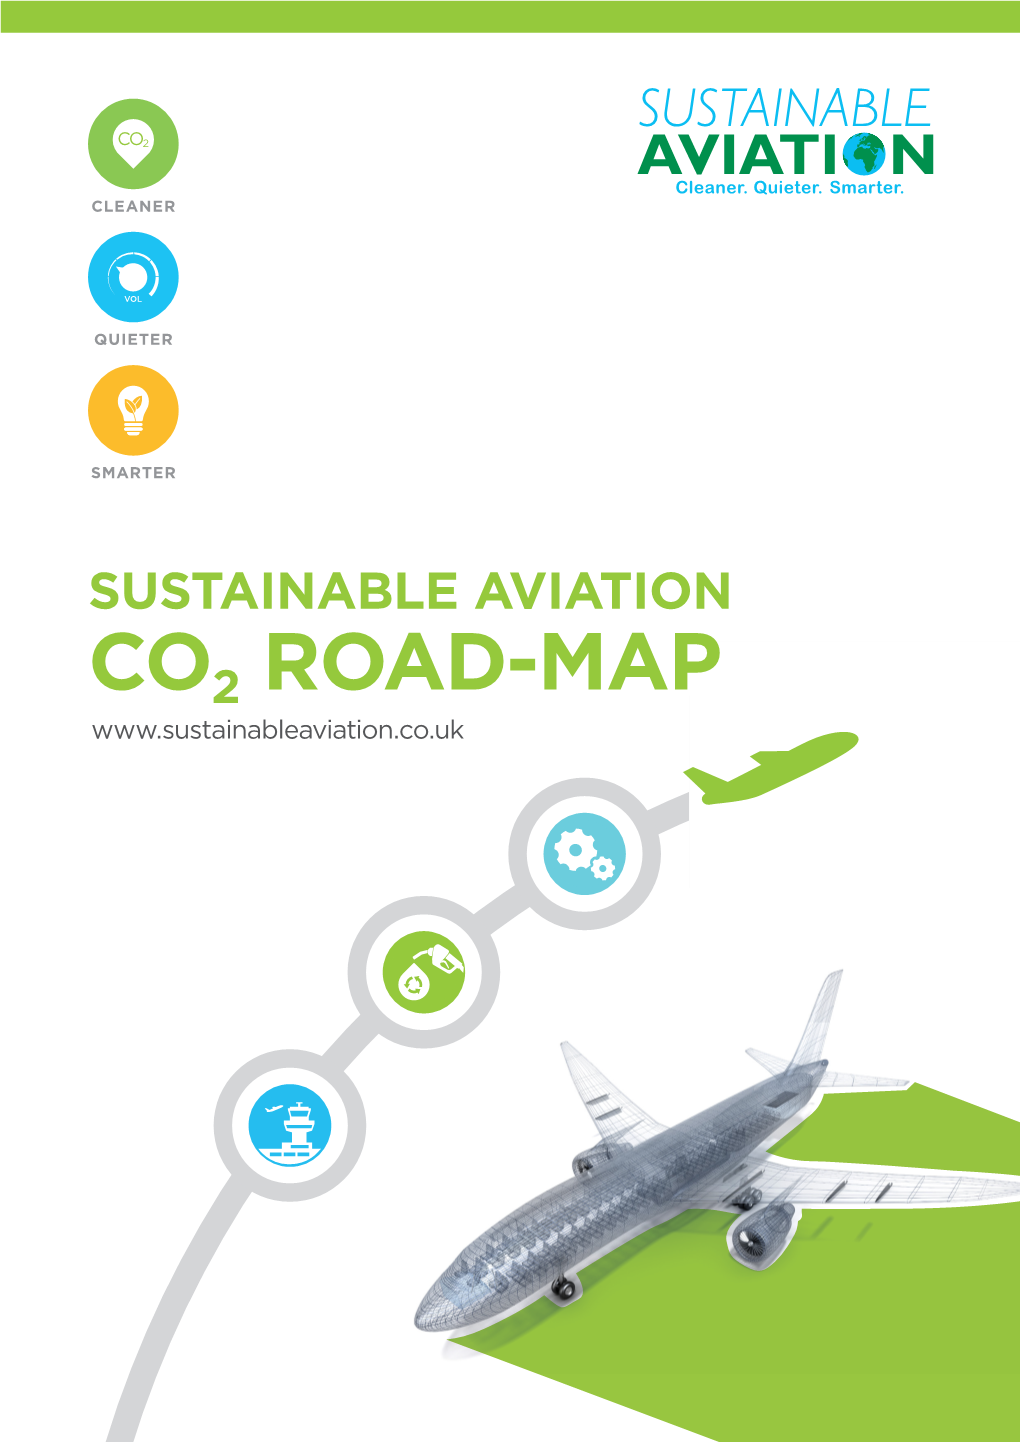 SUSTAINABLE AVIATION CO2 ROAD-MAP Sustainable Aviation CO2 Road-Map 2016 © Sustainable Aviation, Dec 2016